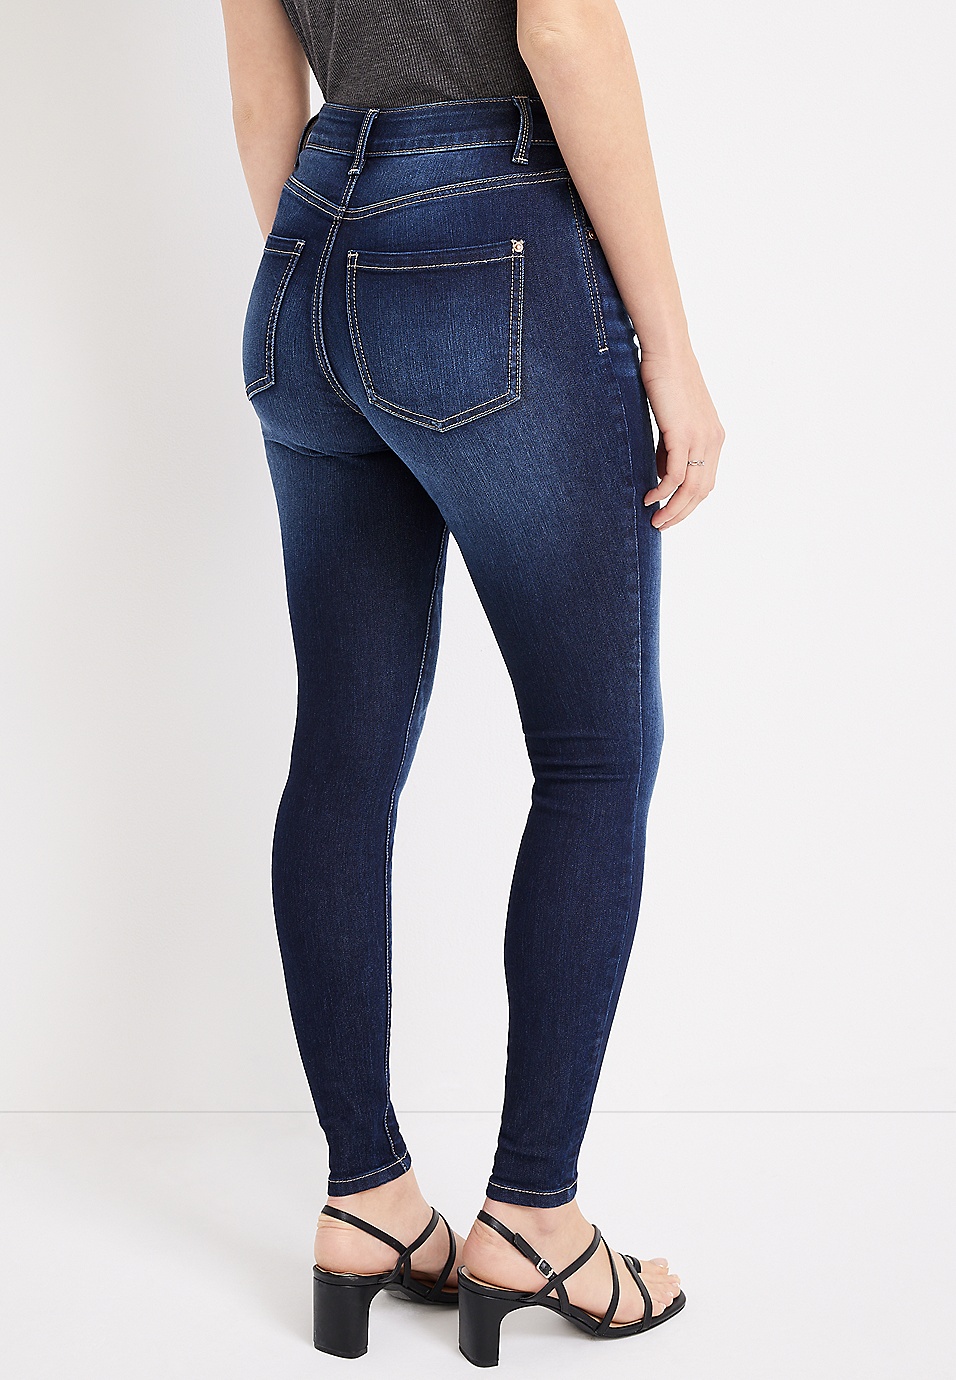 m jeans by maurices™ Everflex™ Super Skinny High Rise Stretch Jean